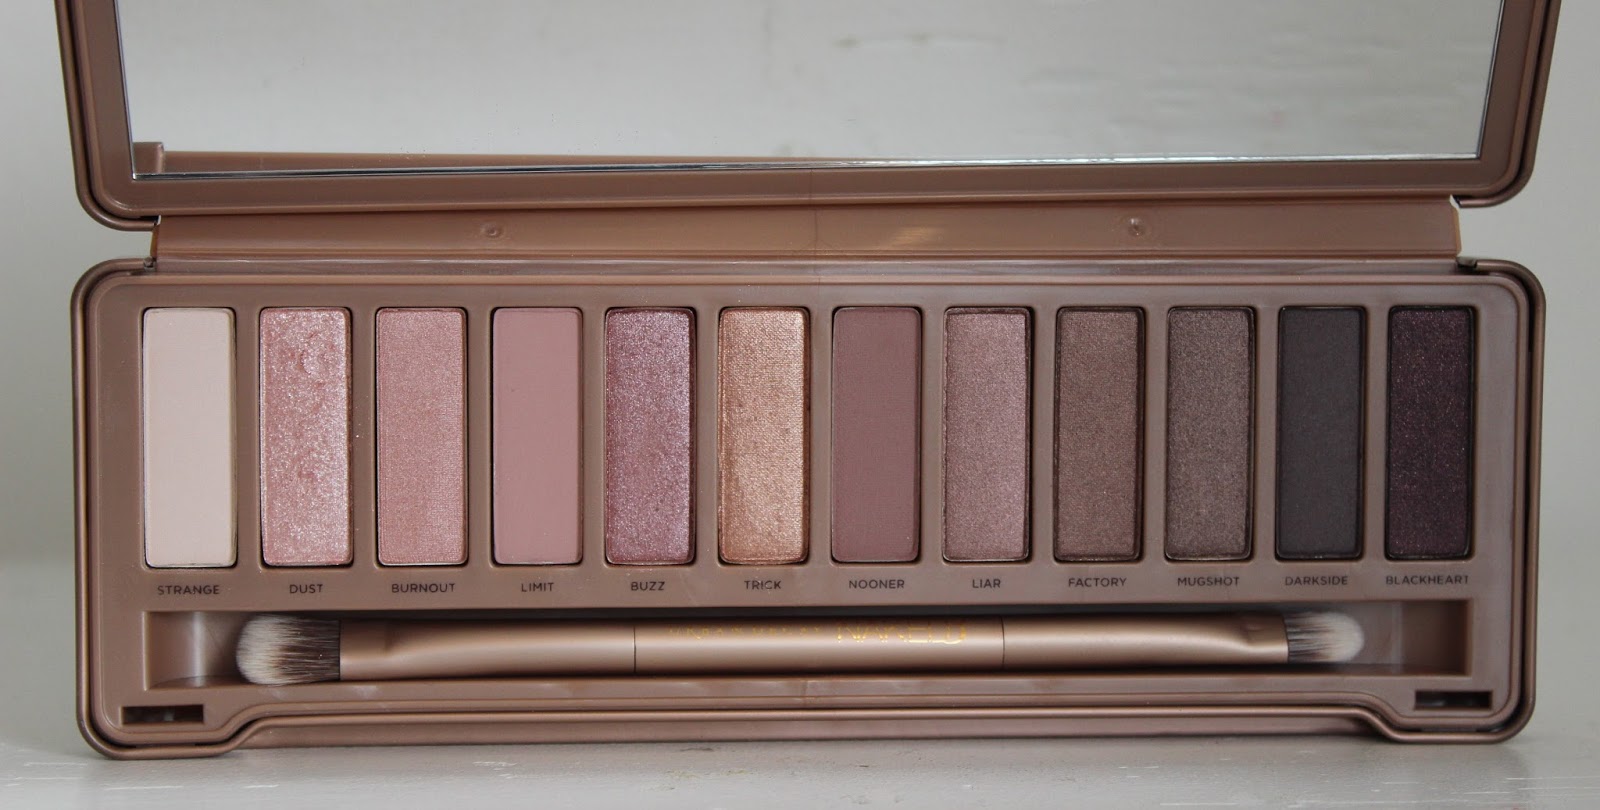 URBAN DECAY NAKED 3 PALETTE - Lily Pebbles